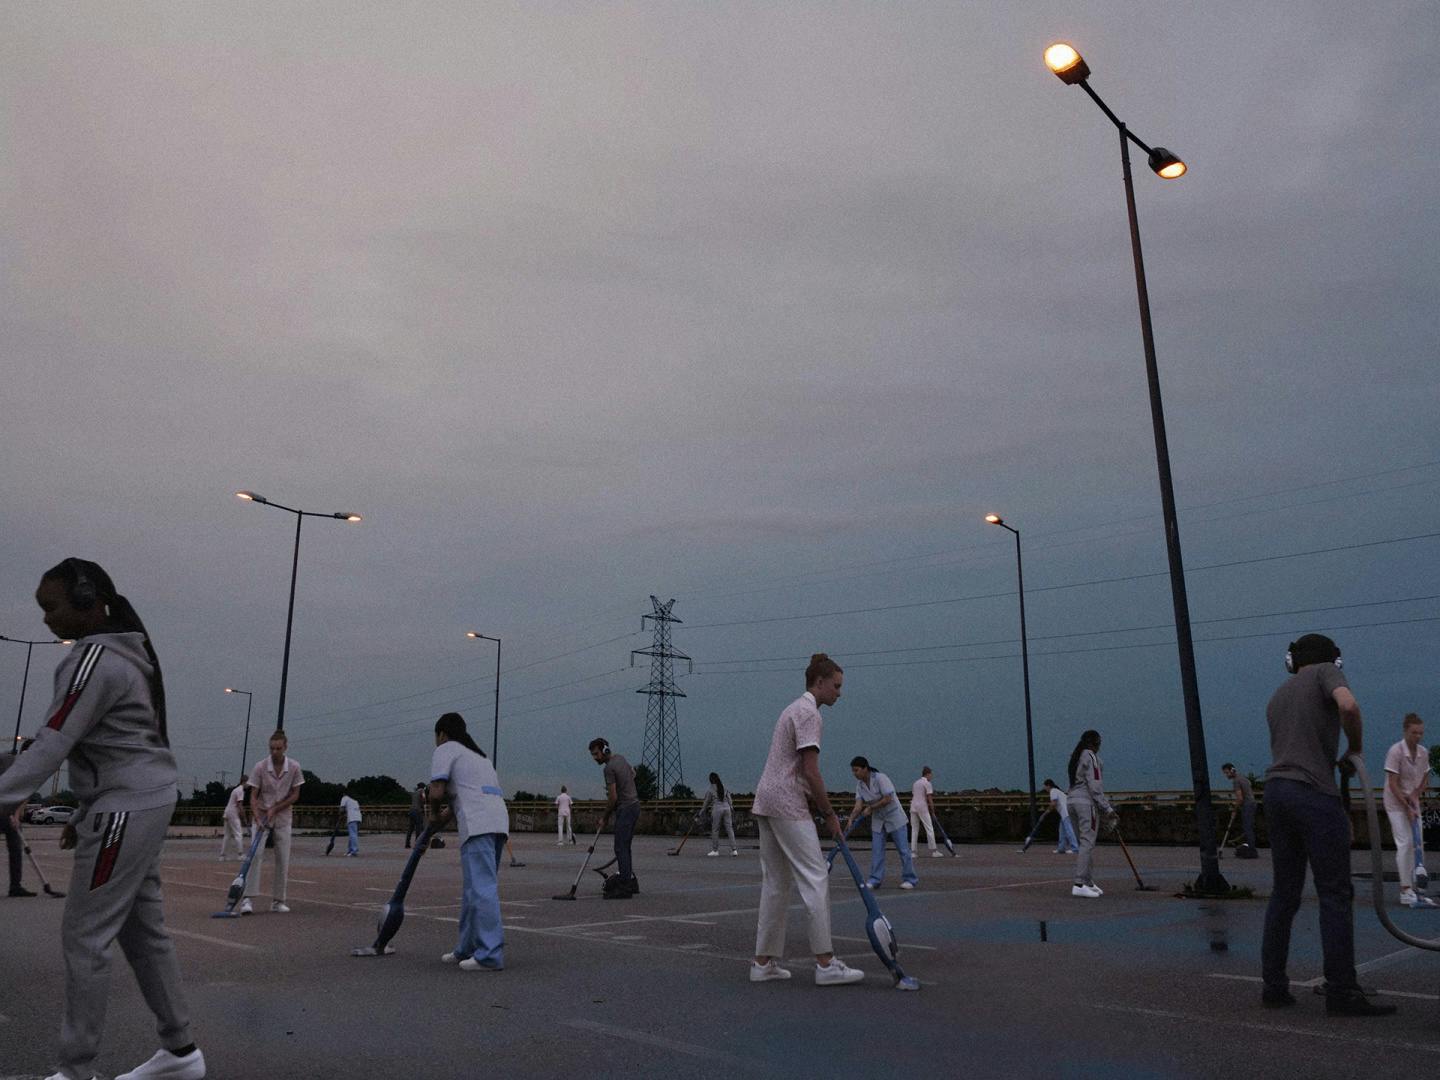 Still from the music video for Schwer by Paul Kalkbrenner showing visualisations of people walking around a car park at dusk appearing to hold metal detectors